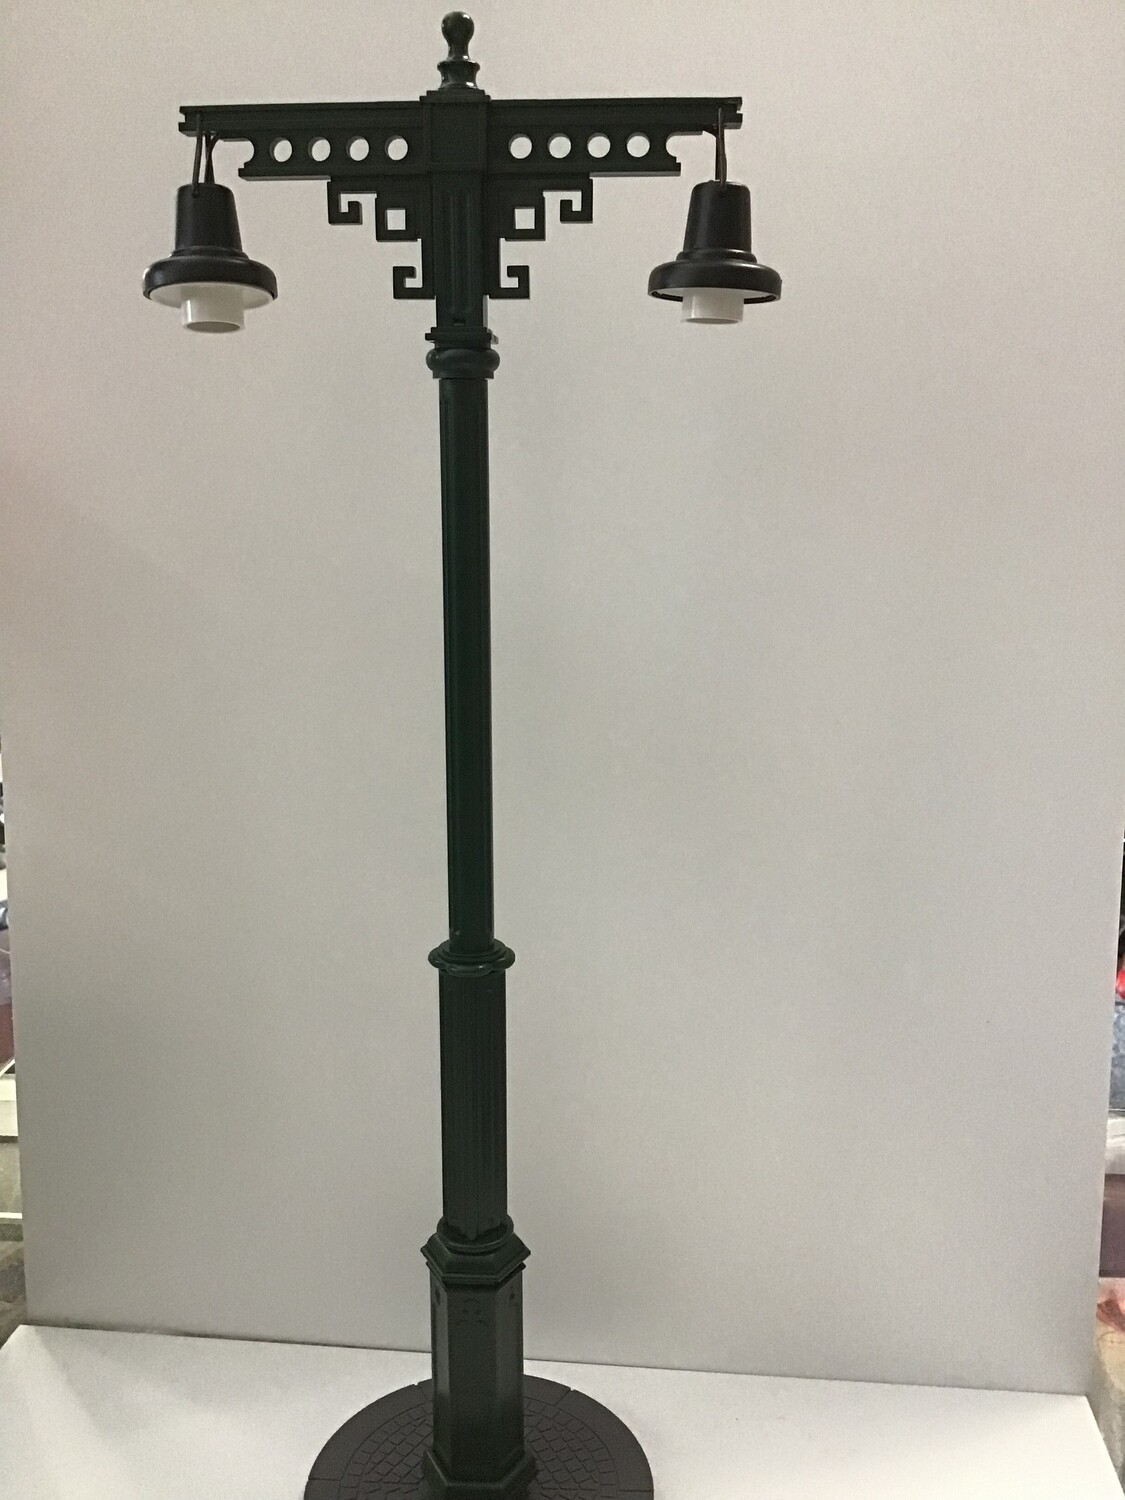 LGb 50560 double station lamp